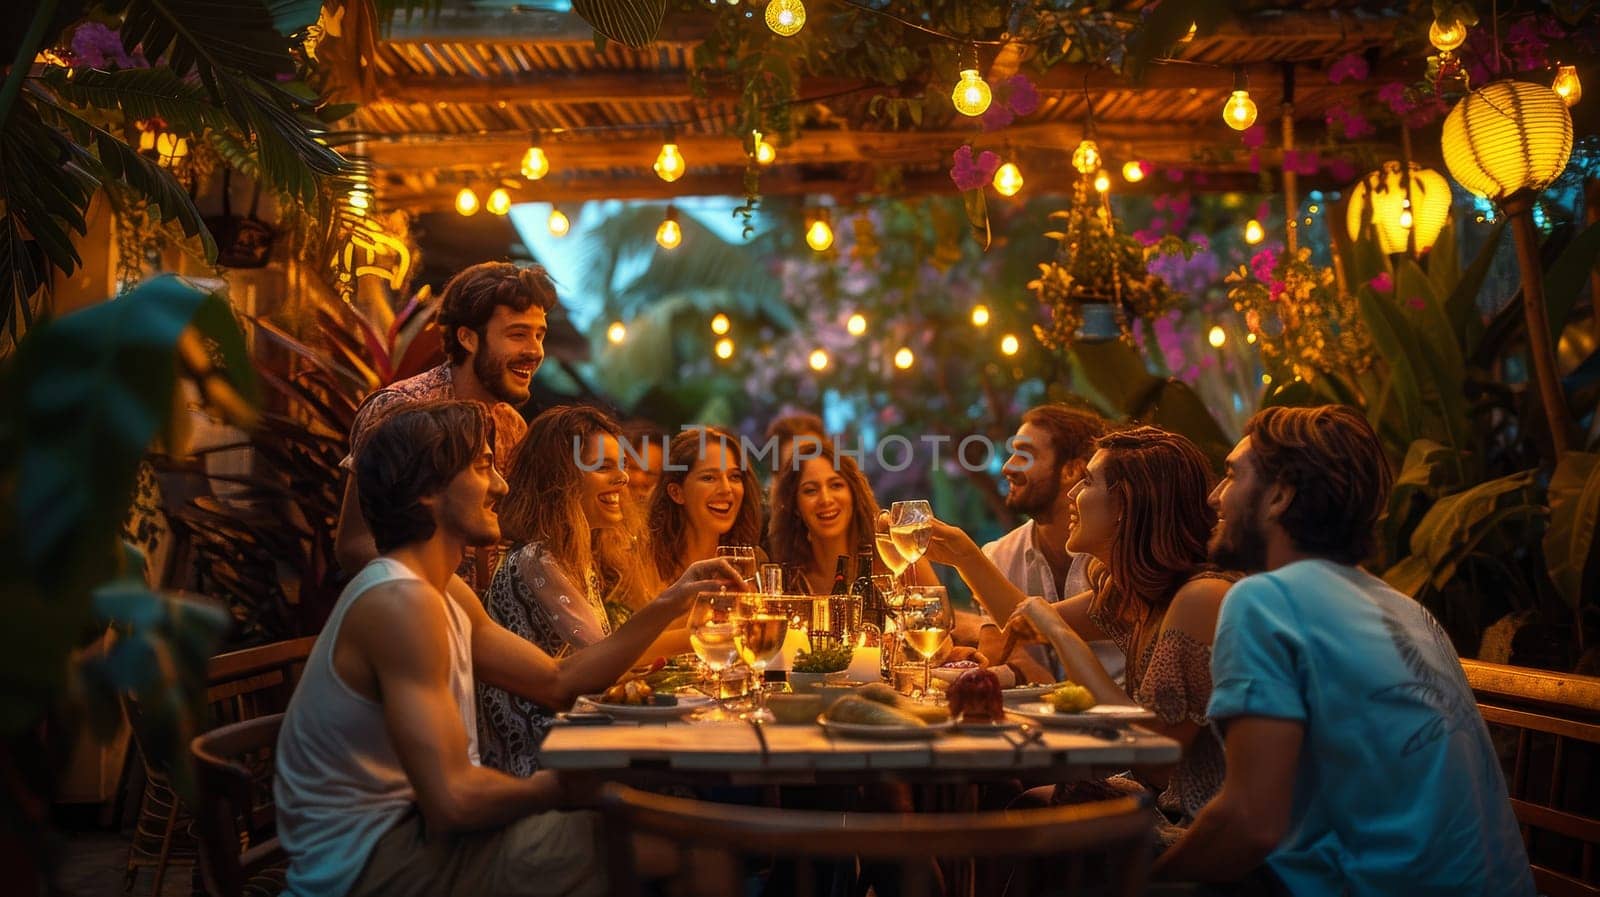 A group of people are gathered around a table with wine glasses and food by itchaznong